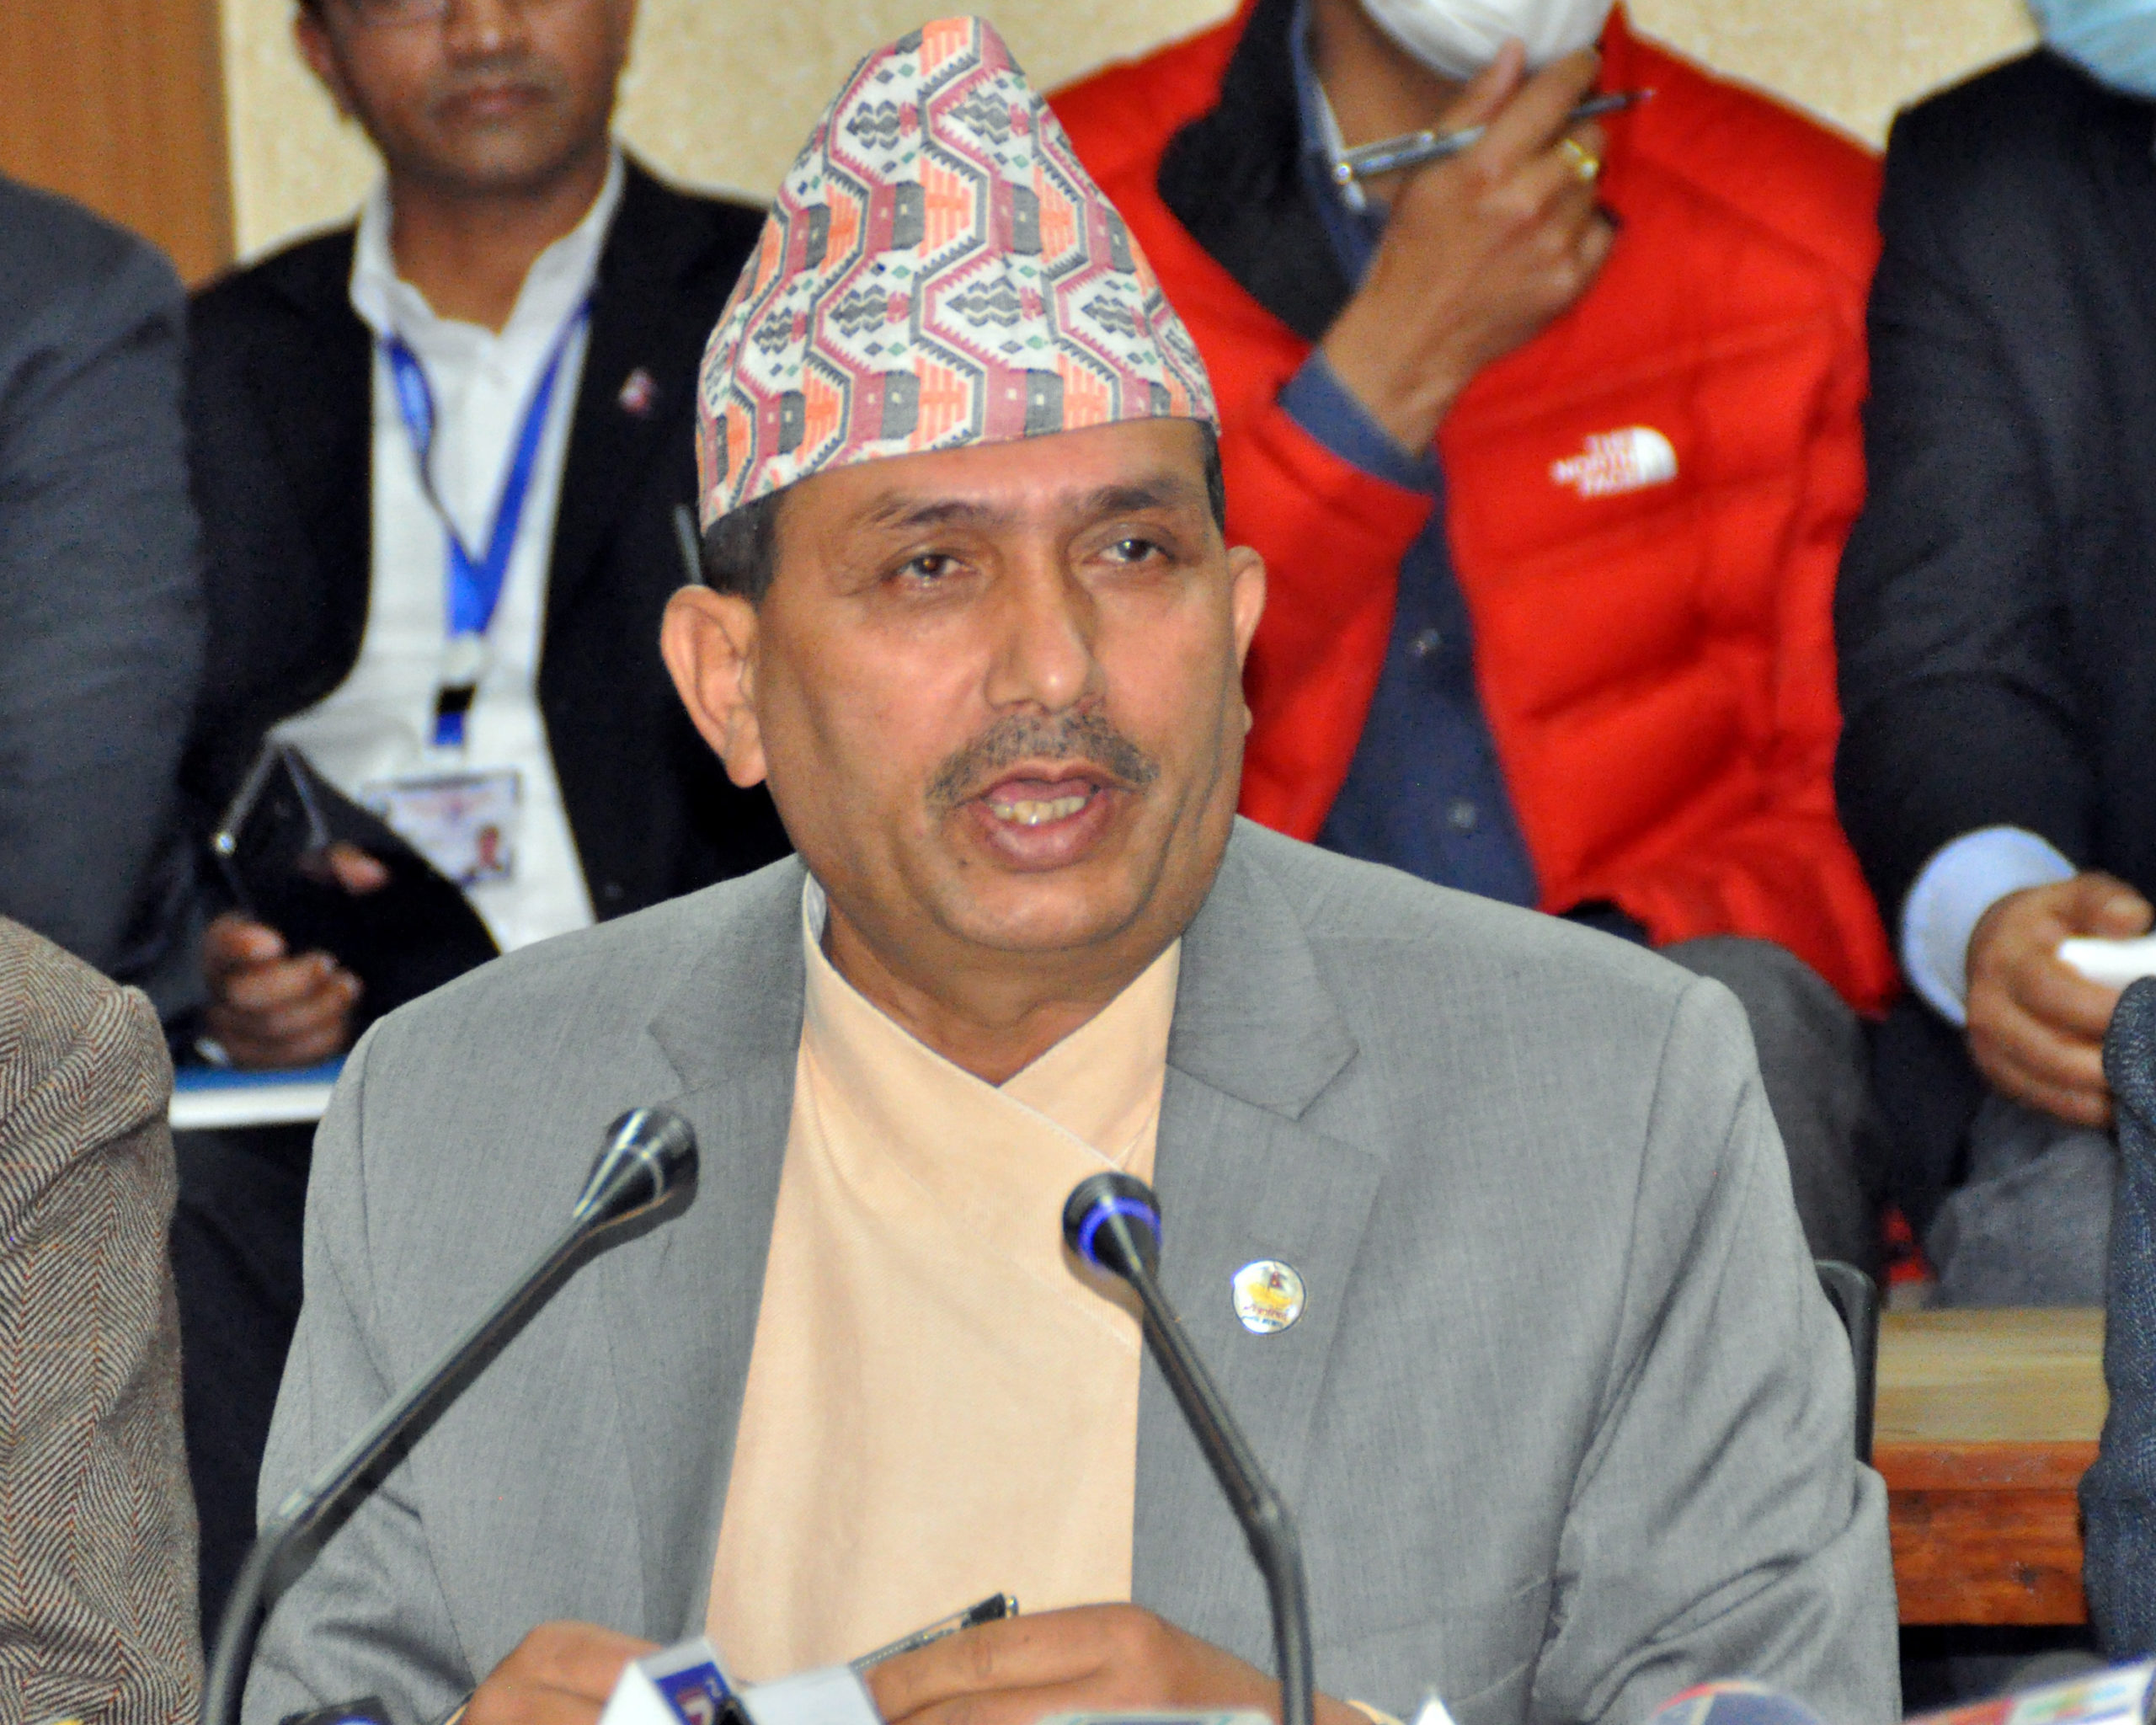 PAC to summon Health Minister Dhakal over irregularities in medical supplies procurement